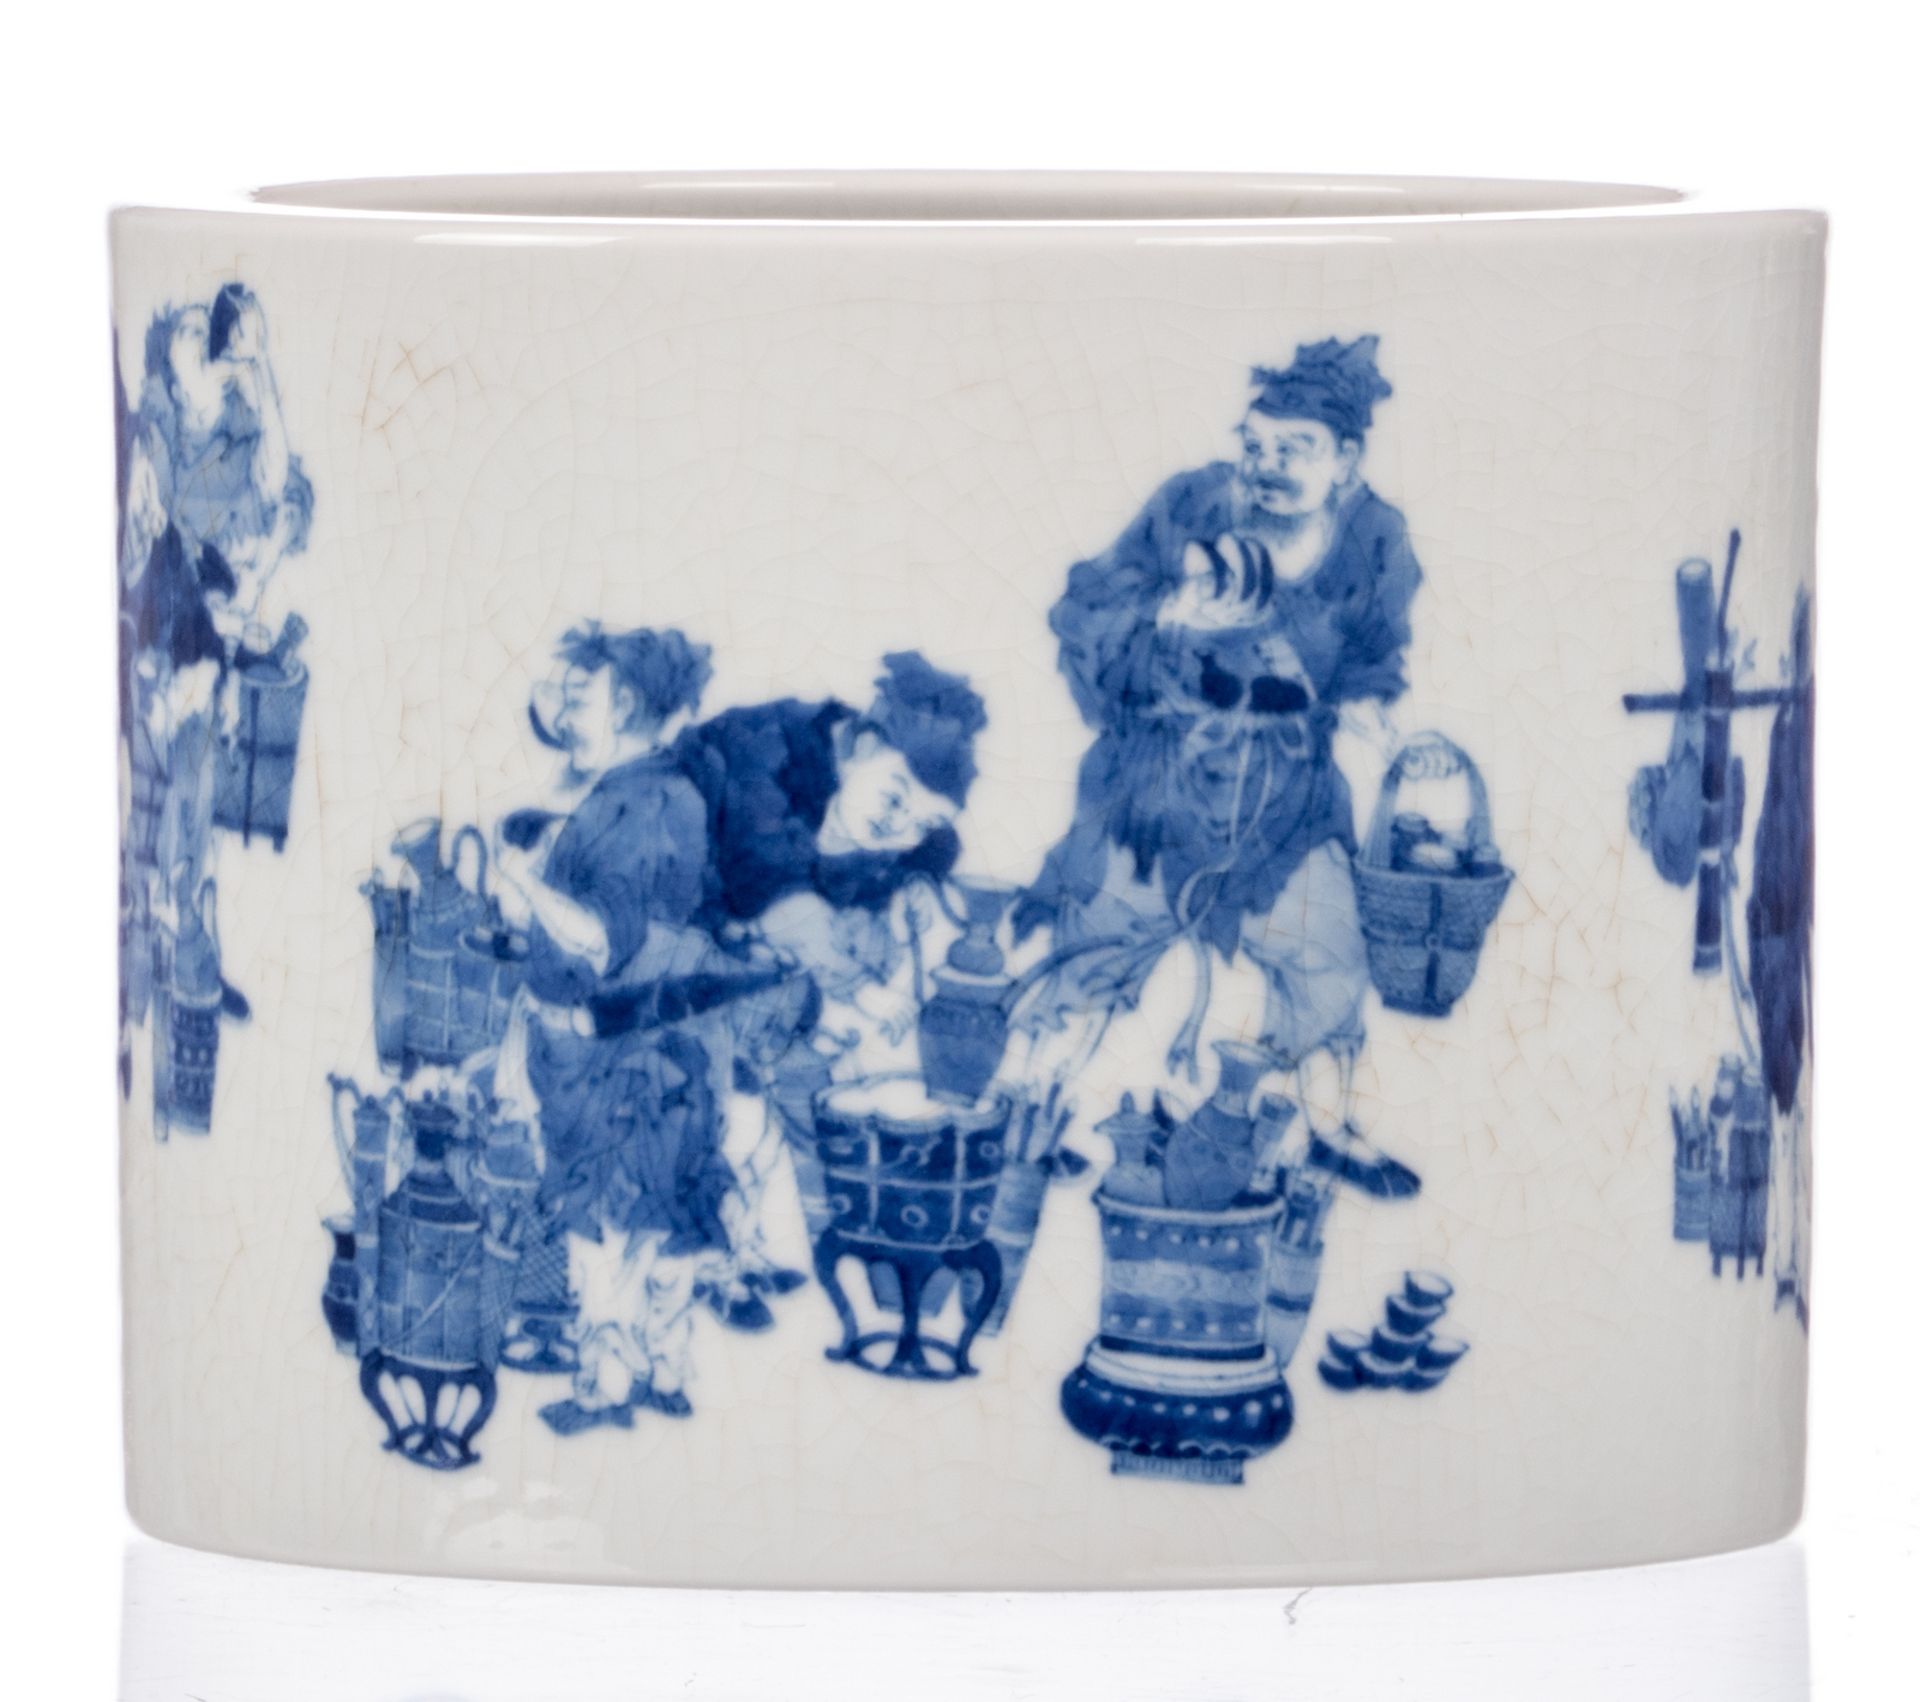 A Chinese blue and white brushpot, decorated with animated scenes, marked, 20thC, H 15 - Diameter 20 - Image 4 of 8